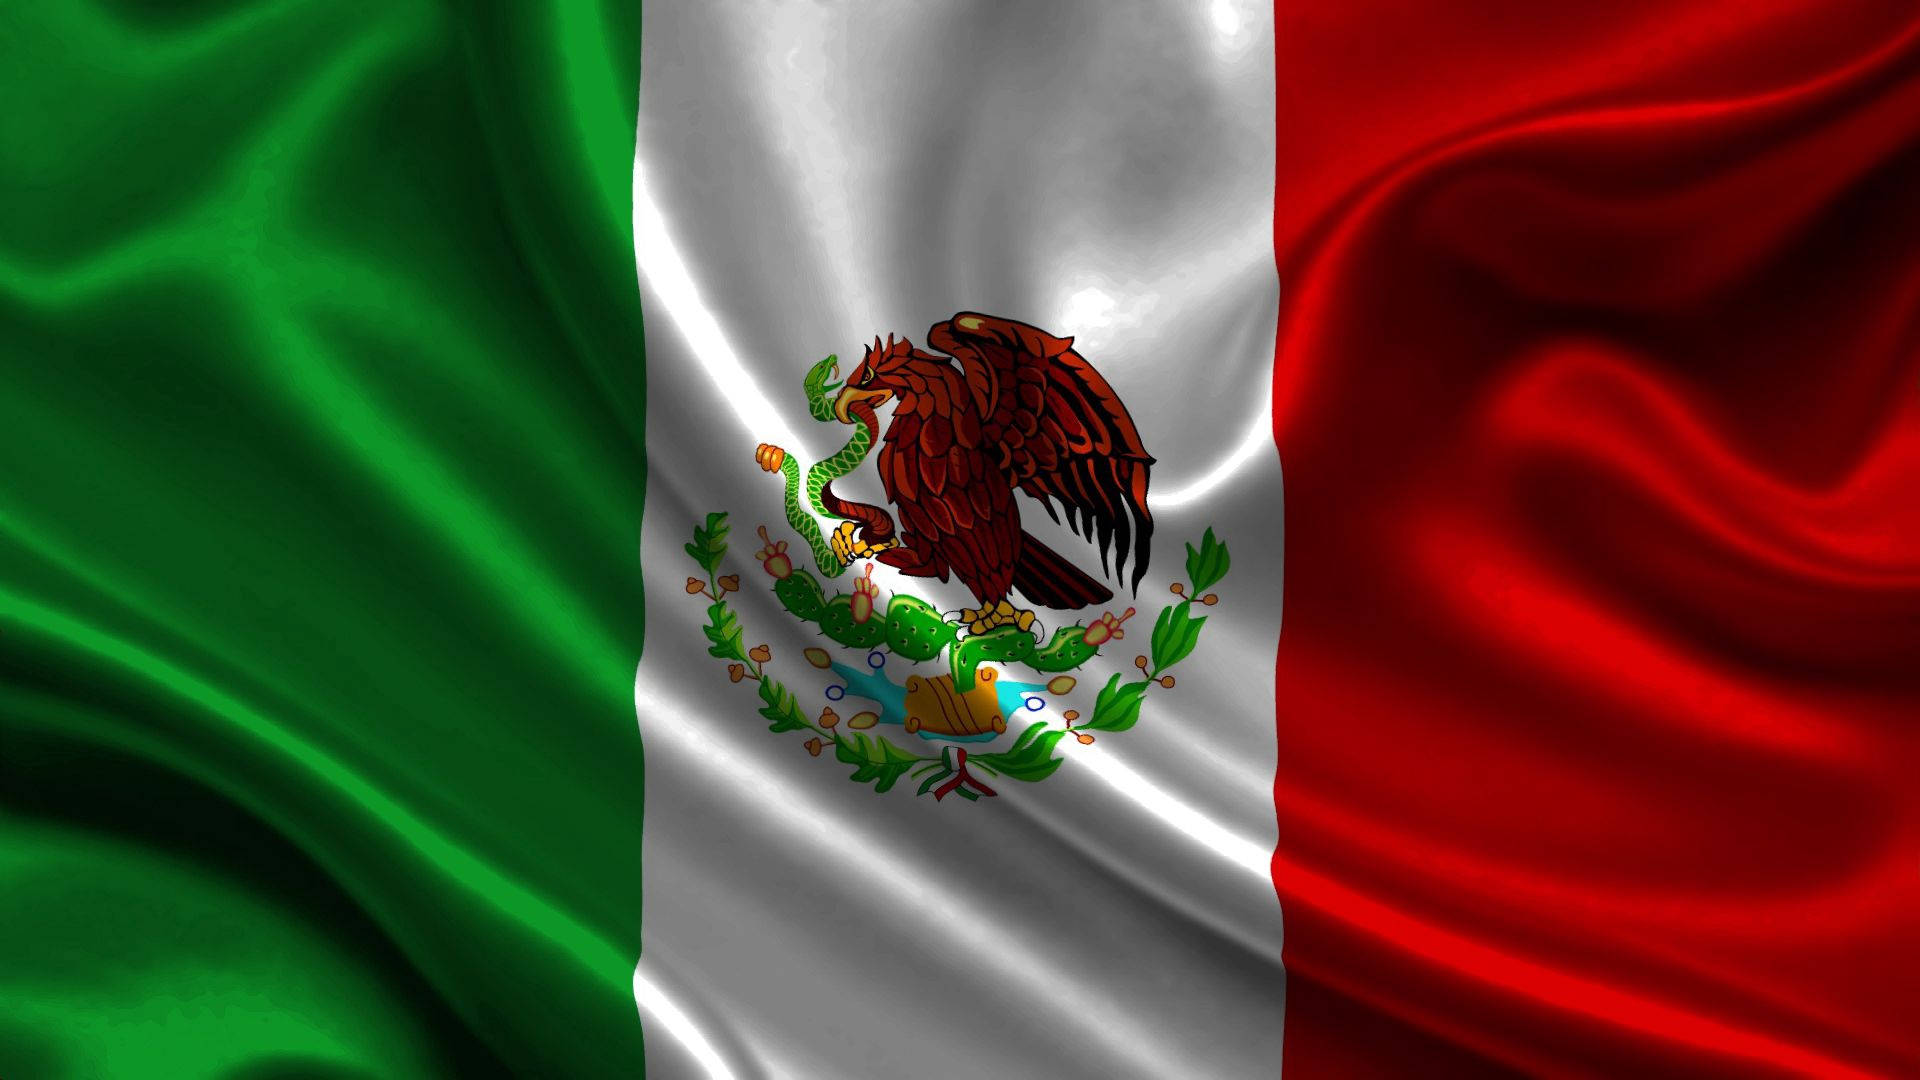 100+] Mexico Flag Wallpapers